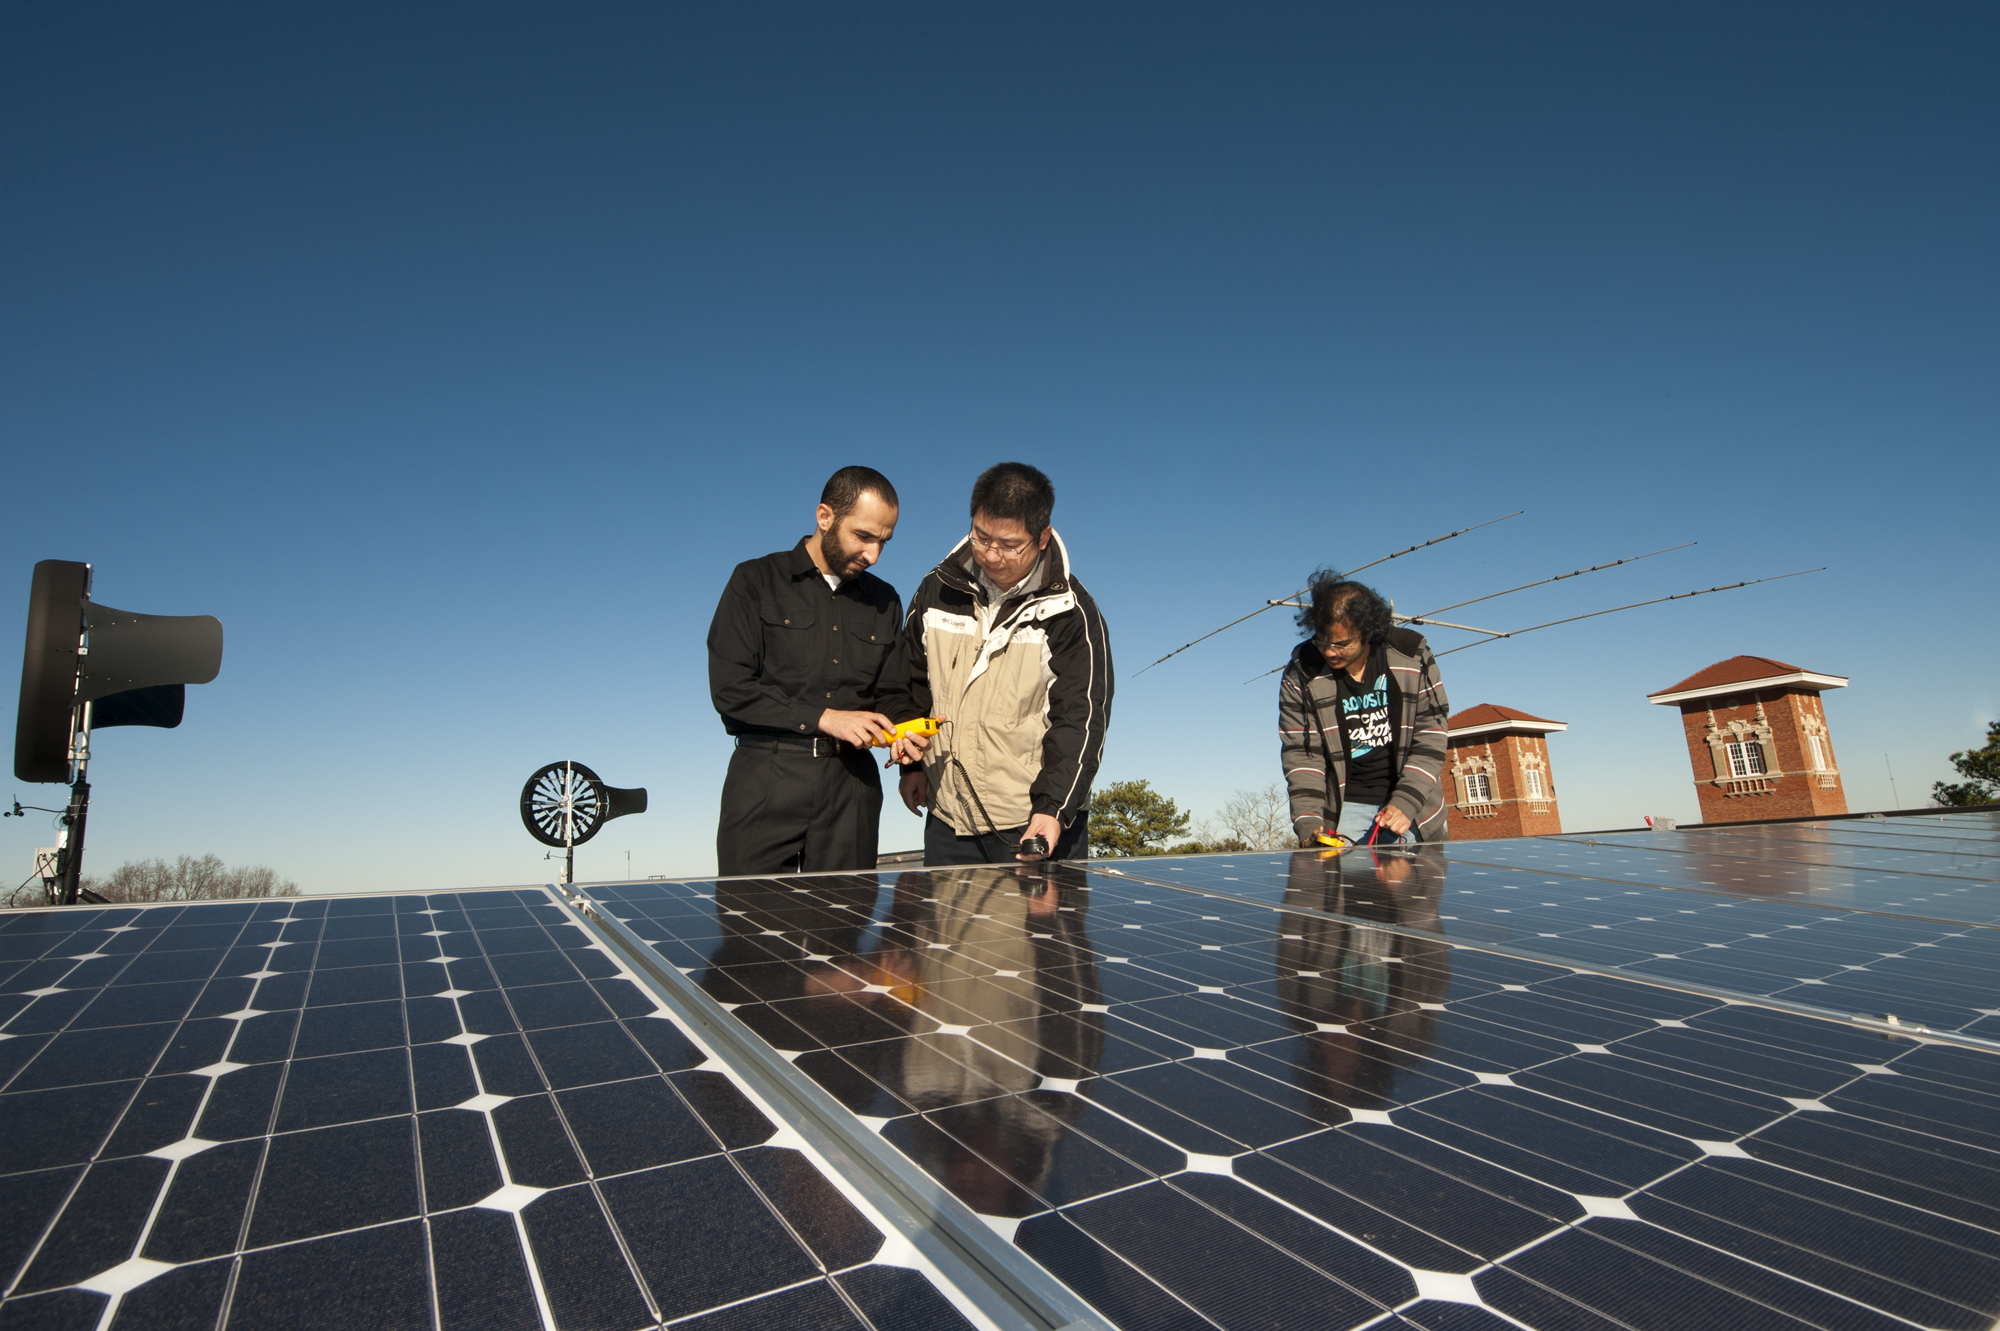 Mississippi State University's Simrall Electrical & Computer Engineering Building features an energy farm with solar panels and wind turbines on the roof. From left, doctoral candidate Saher Albatran, assistant professor Yong Fu and master's candidate Chiranjeevi Madvesh determine how much energy is being generated.